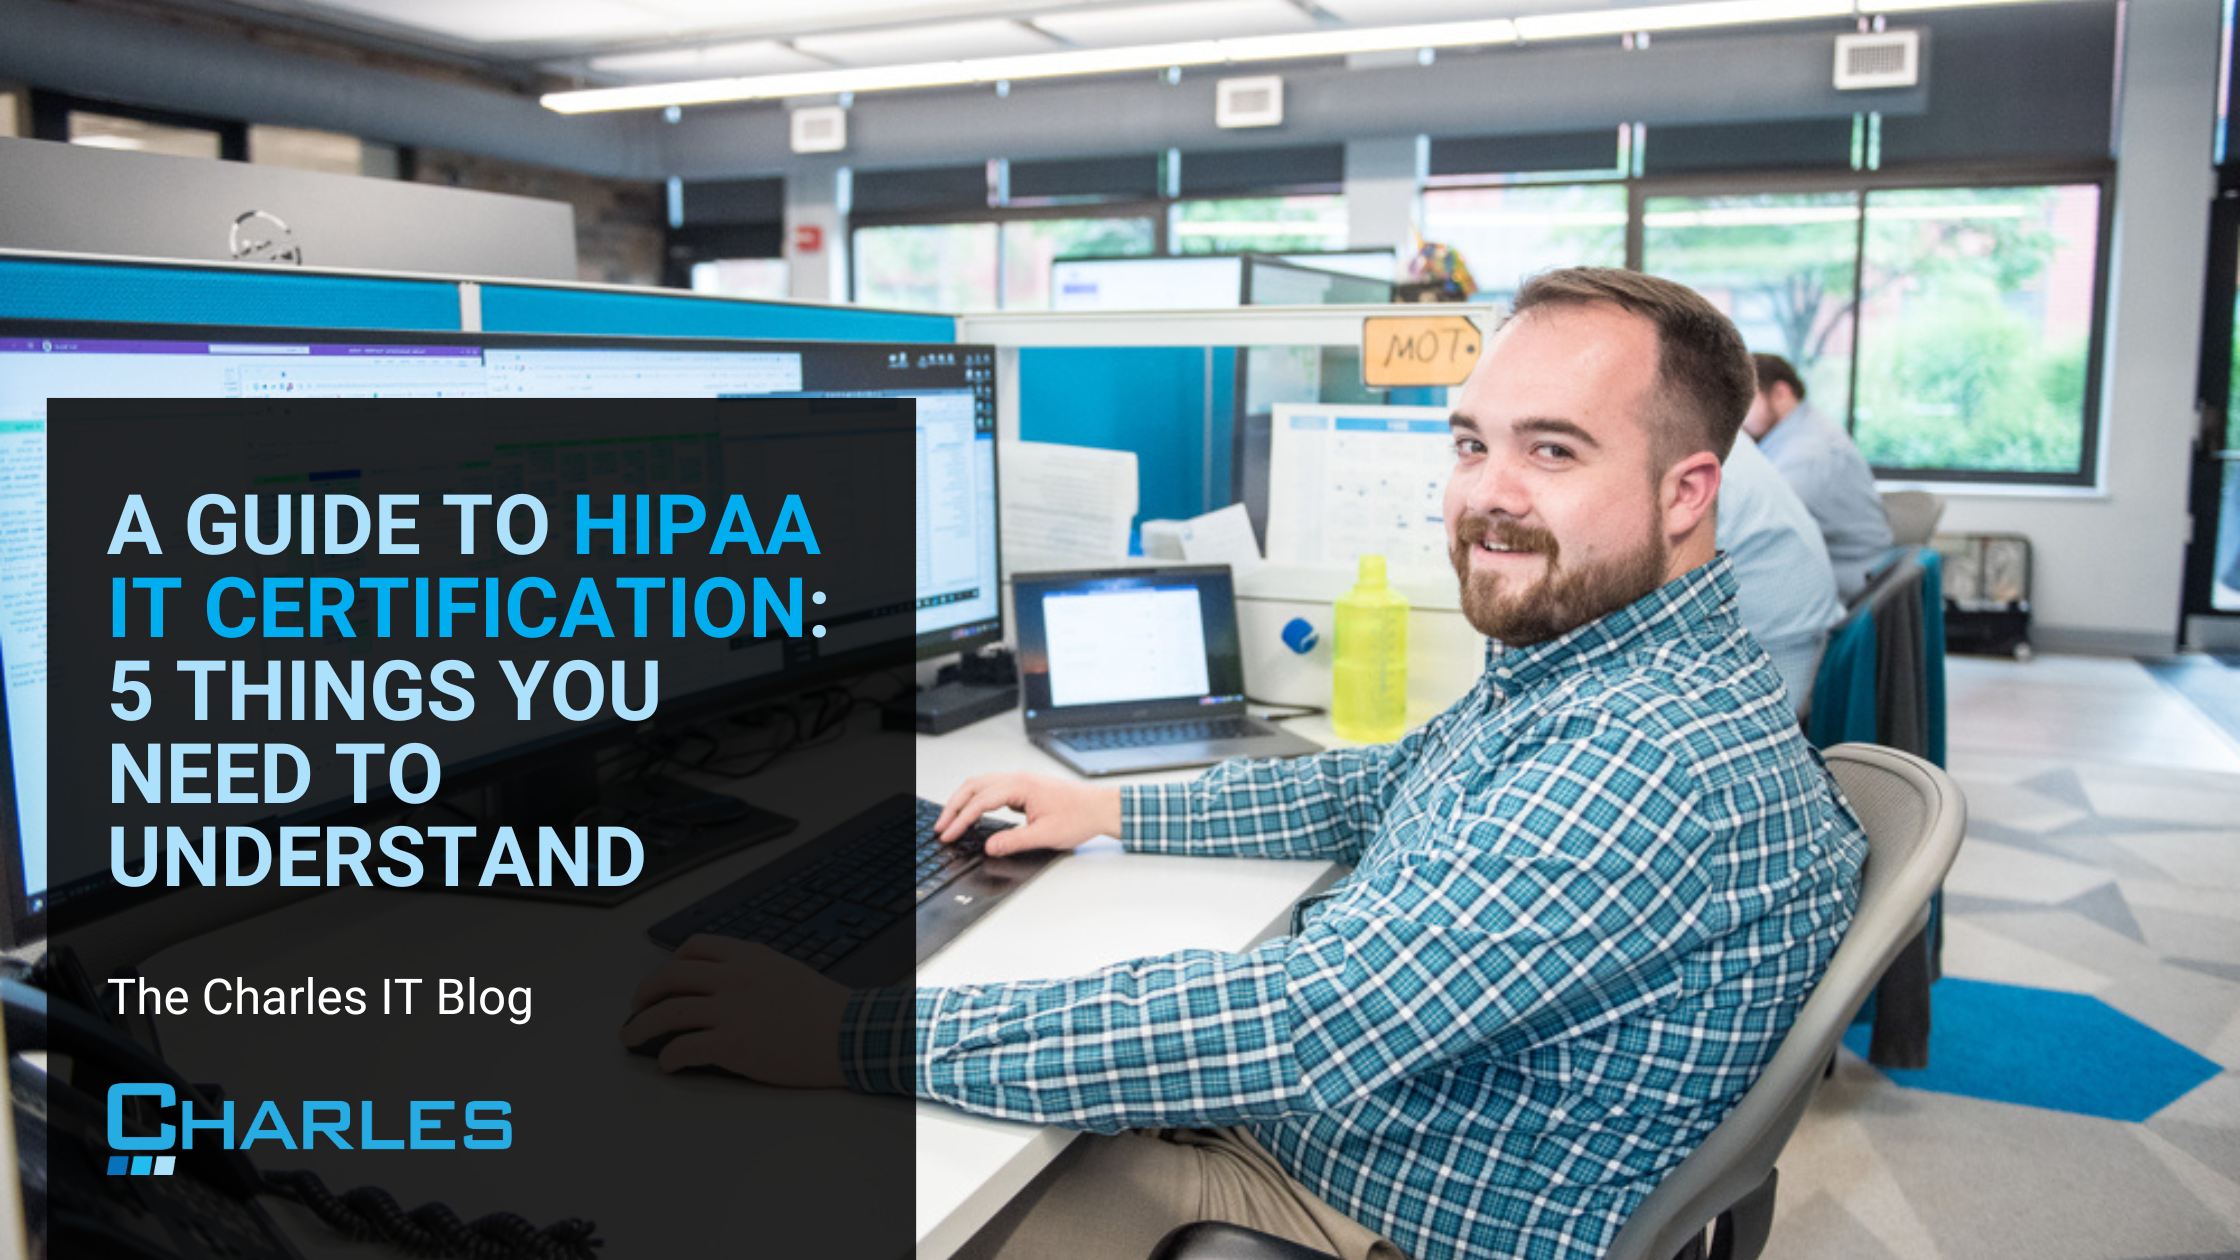 A Guide to HIPAA IT Certification: 5 Things You Need to Understand